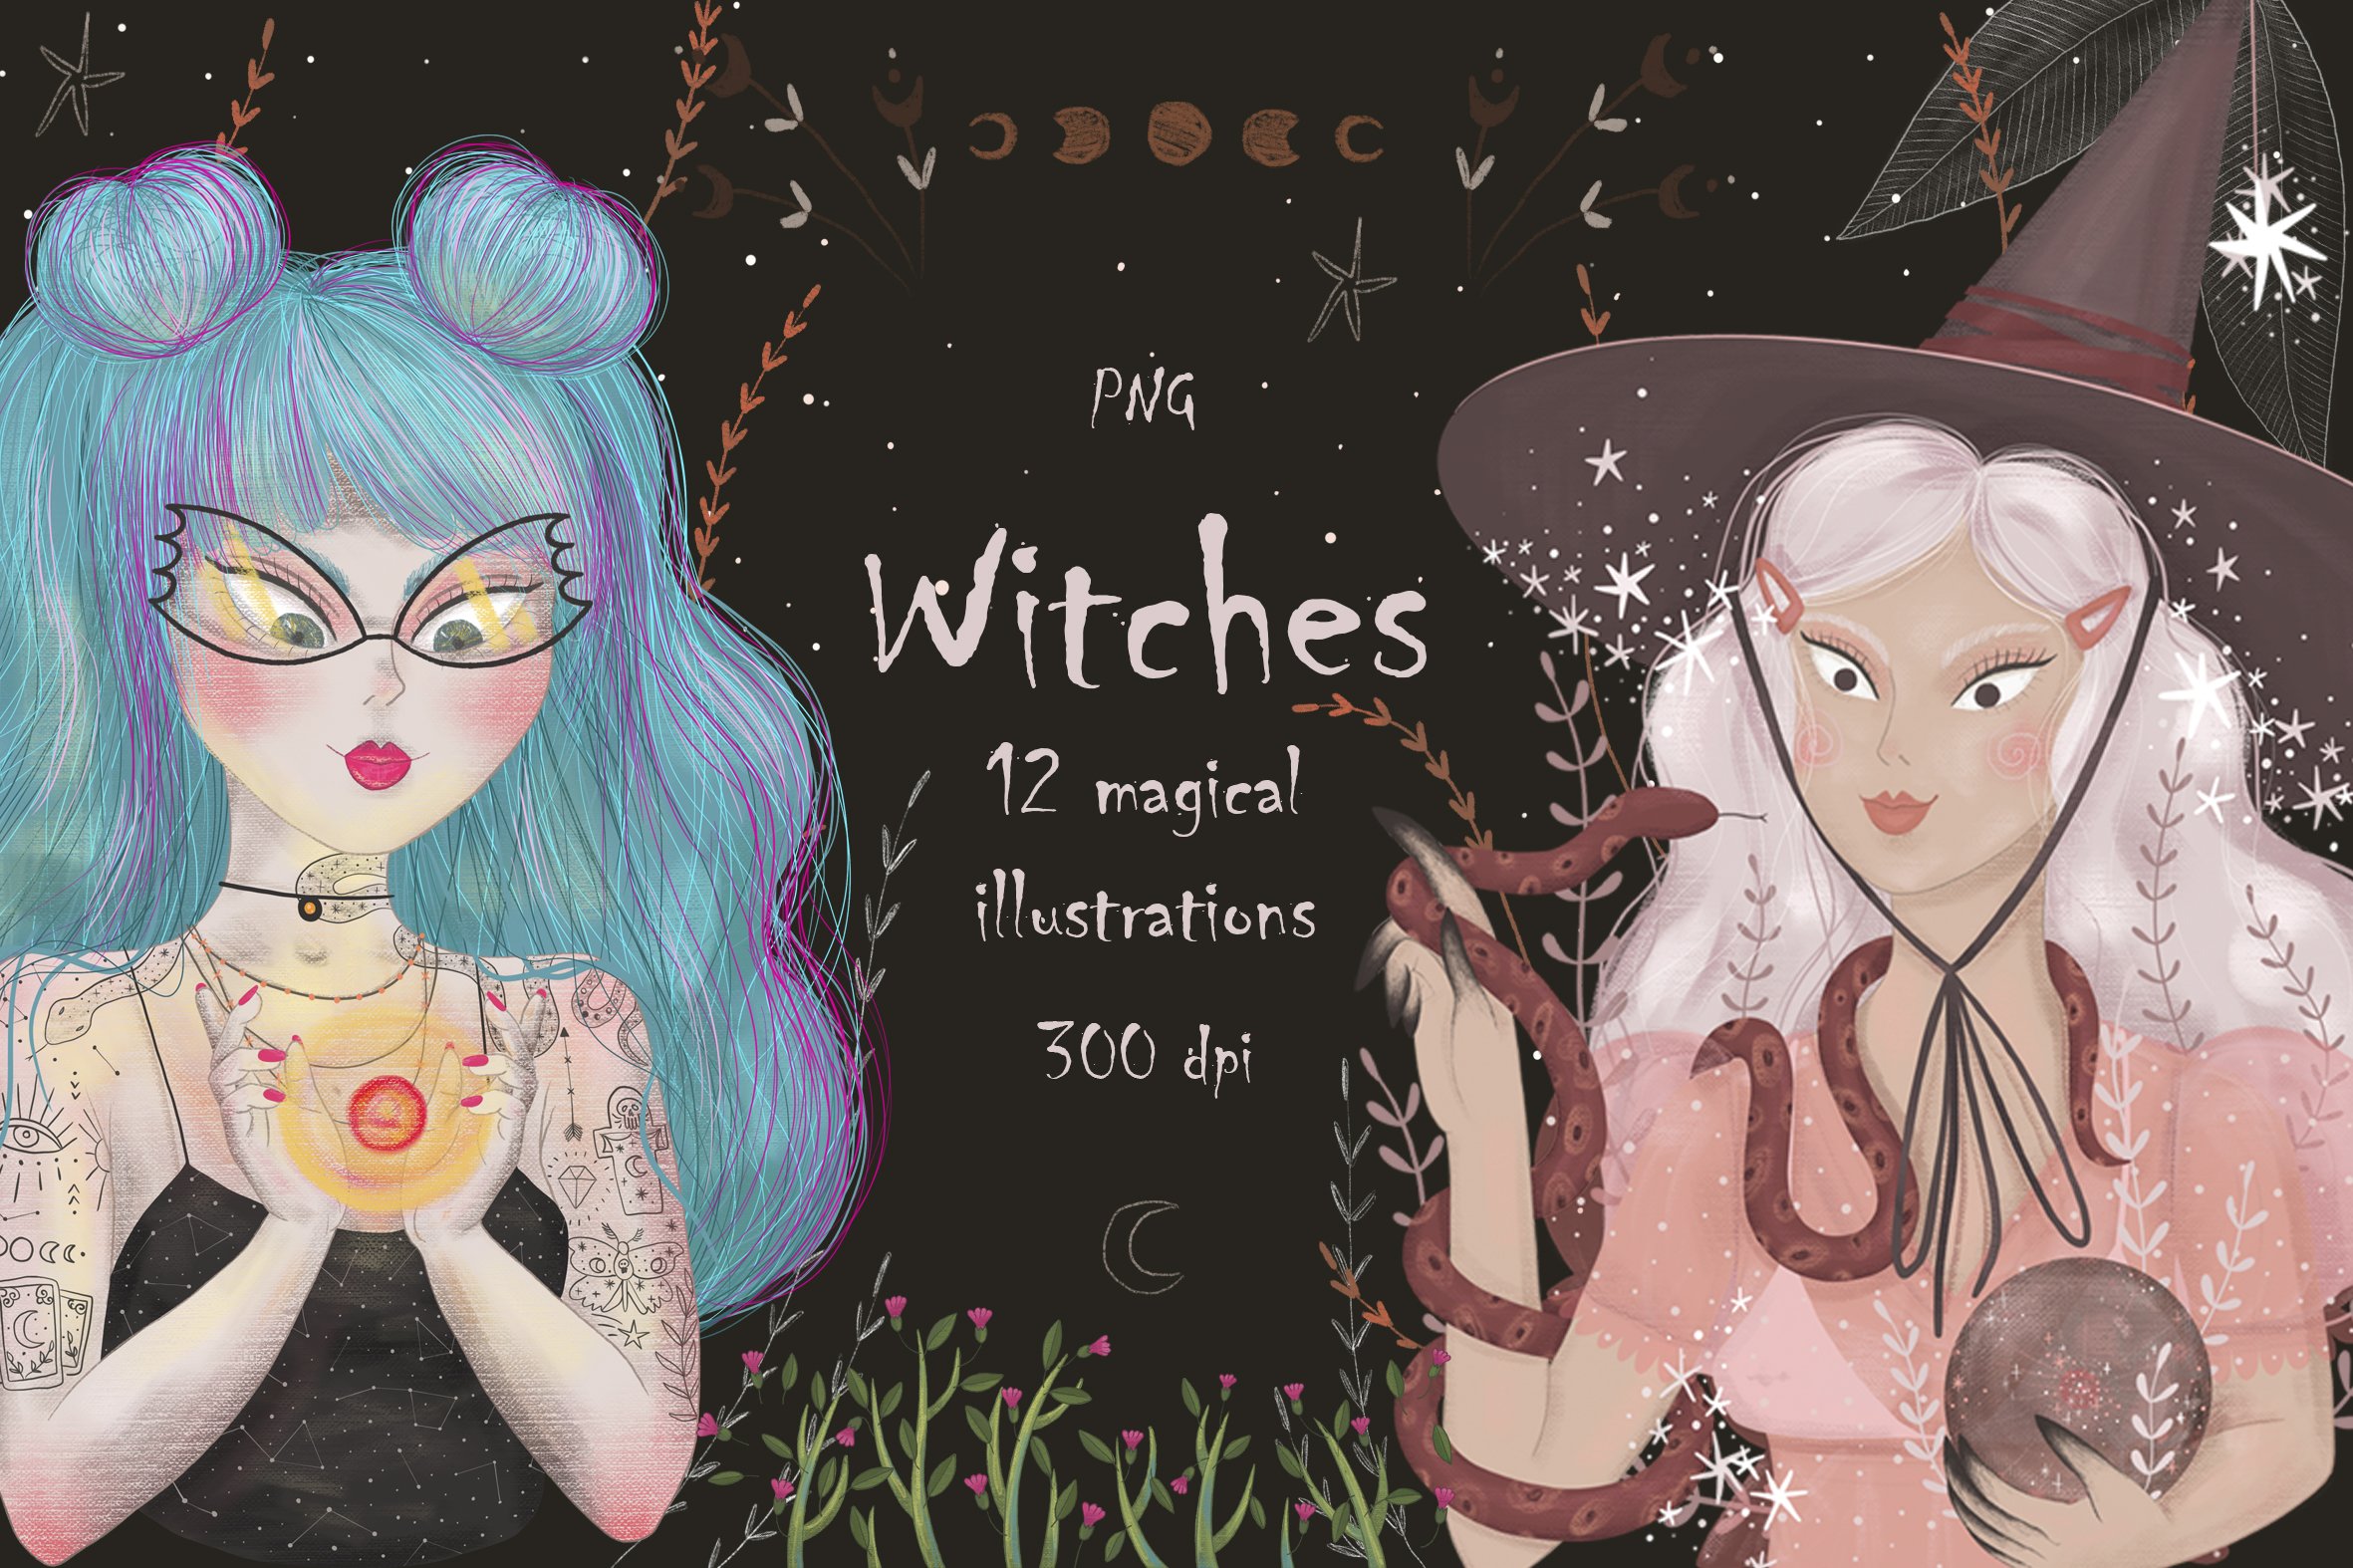 Witches cover image.